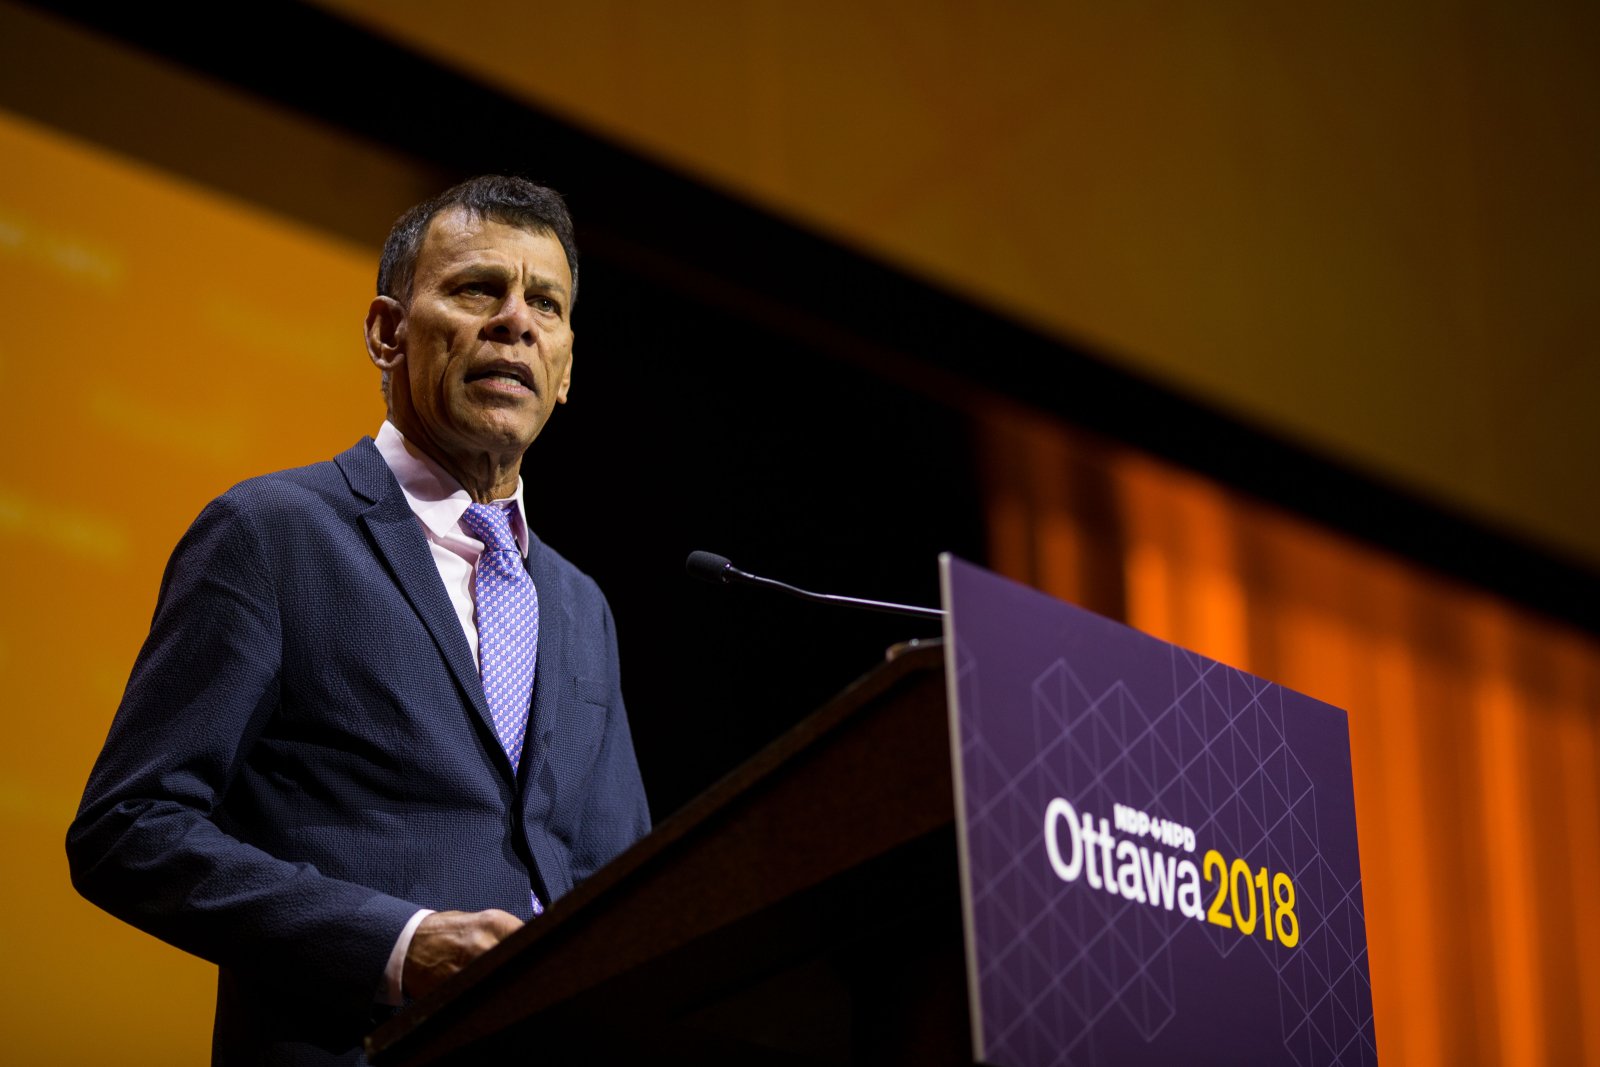 Canadian Labour Congress president Hassan Yussuff speaks to delegates at the NDP's national convention in Ottawa on Feb. 16, 2018. Photo by Alex Tétreault